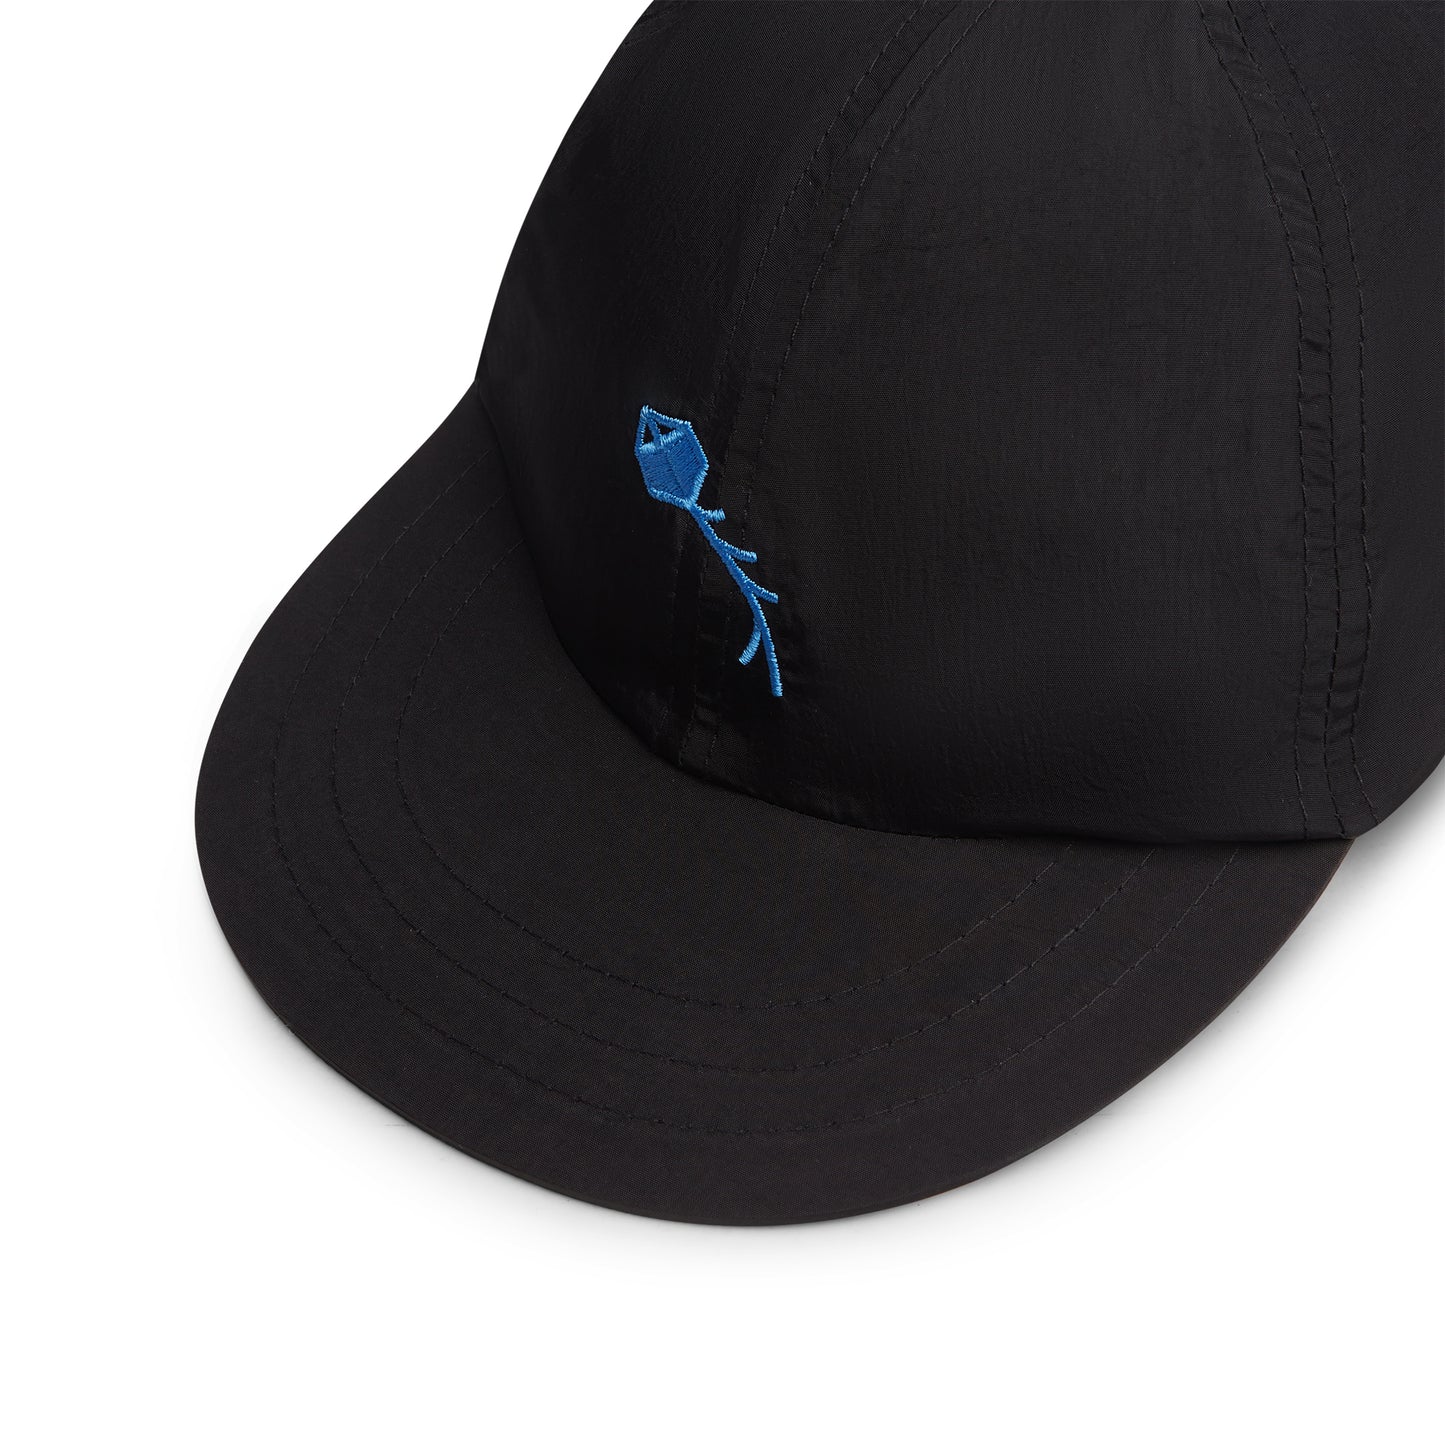 CLASS - Polo Hat Pipa "Black" - THE GAME